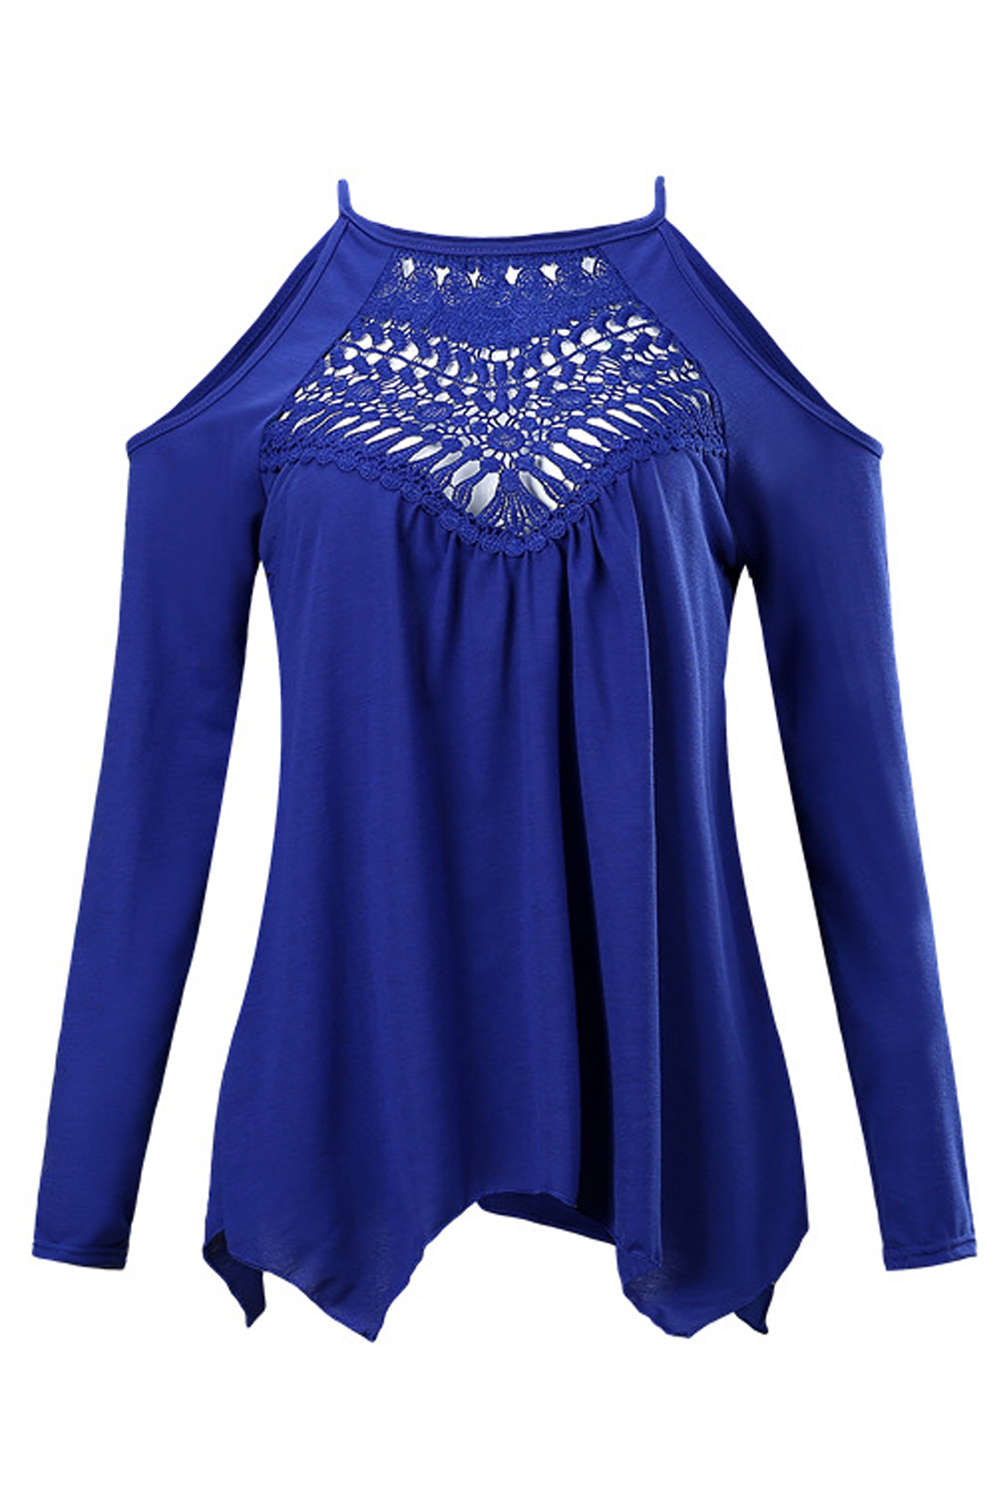 Iyasson Lace Hollow Out Cold Shoulder Blouse